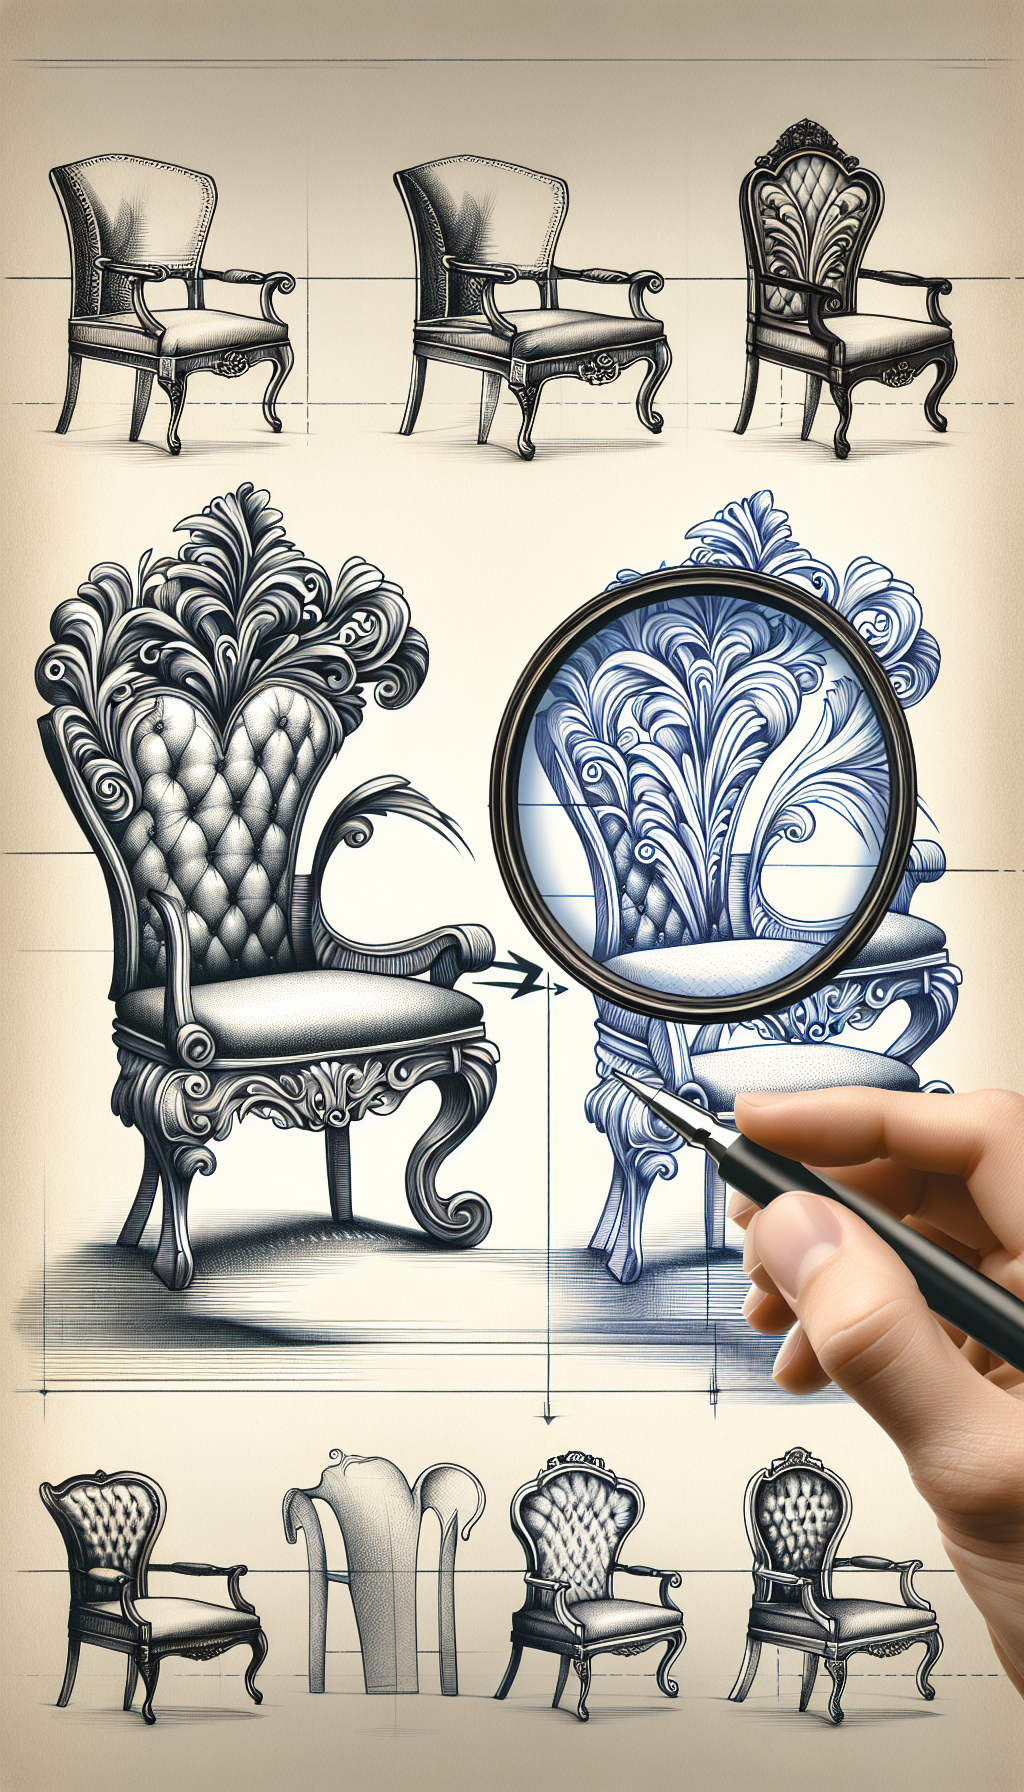 An elegant drawing showcases a transition from an ornate Rococo chair with intricate carvings and curves to a simpler, yet stately Regency chair with clean lines. In between, a magnifying glass hovers, symbolizing the antique chair identification guide, with stylistic details transitioning underneath its lens. 

16:9